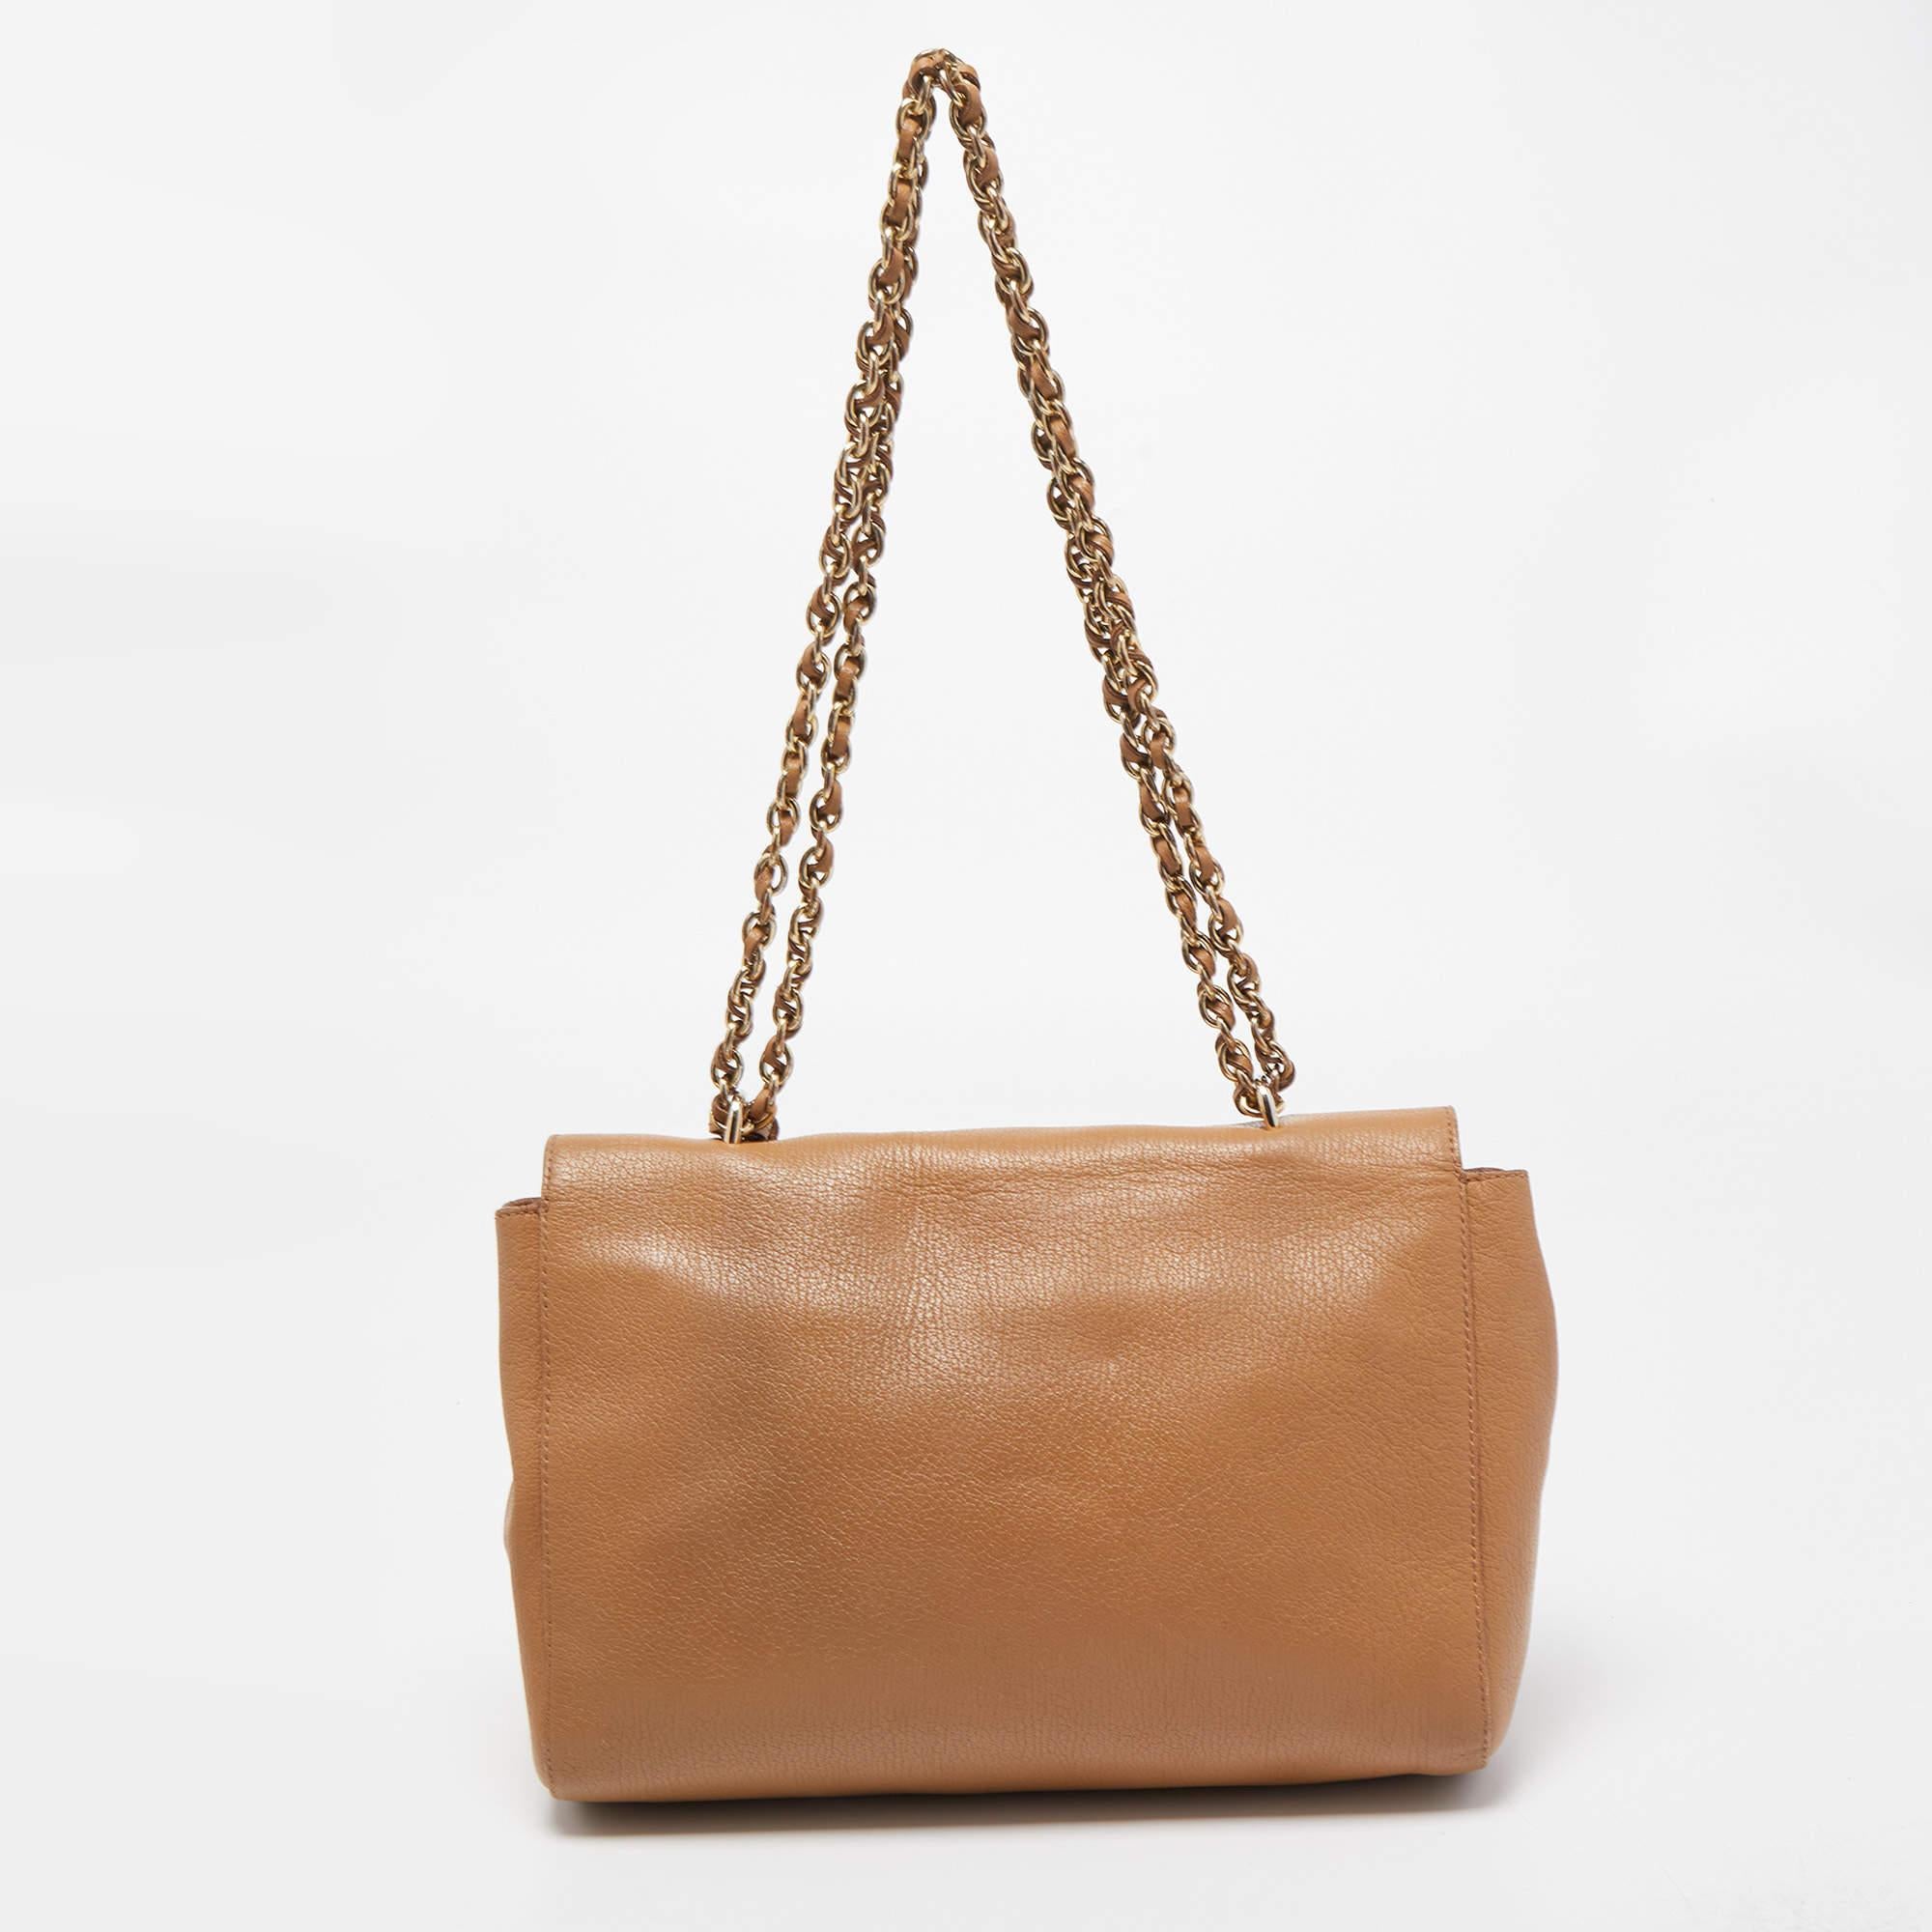 This Mulberry Lily bag is lovely. Crafted from leather, the tan bag comes with a chain and leather woven strap, a postman's lock on the flap, and a suede-lined interior. It is ideal for everyday use.

